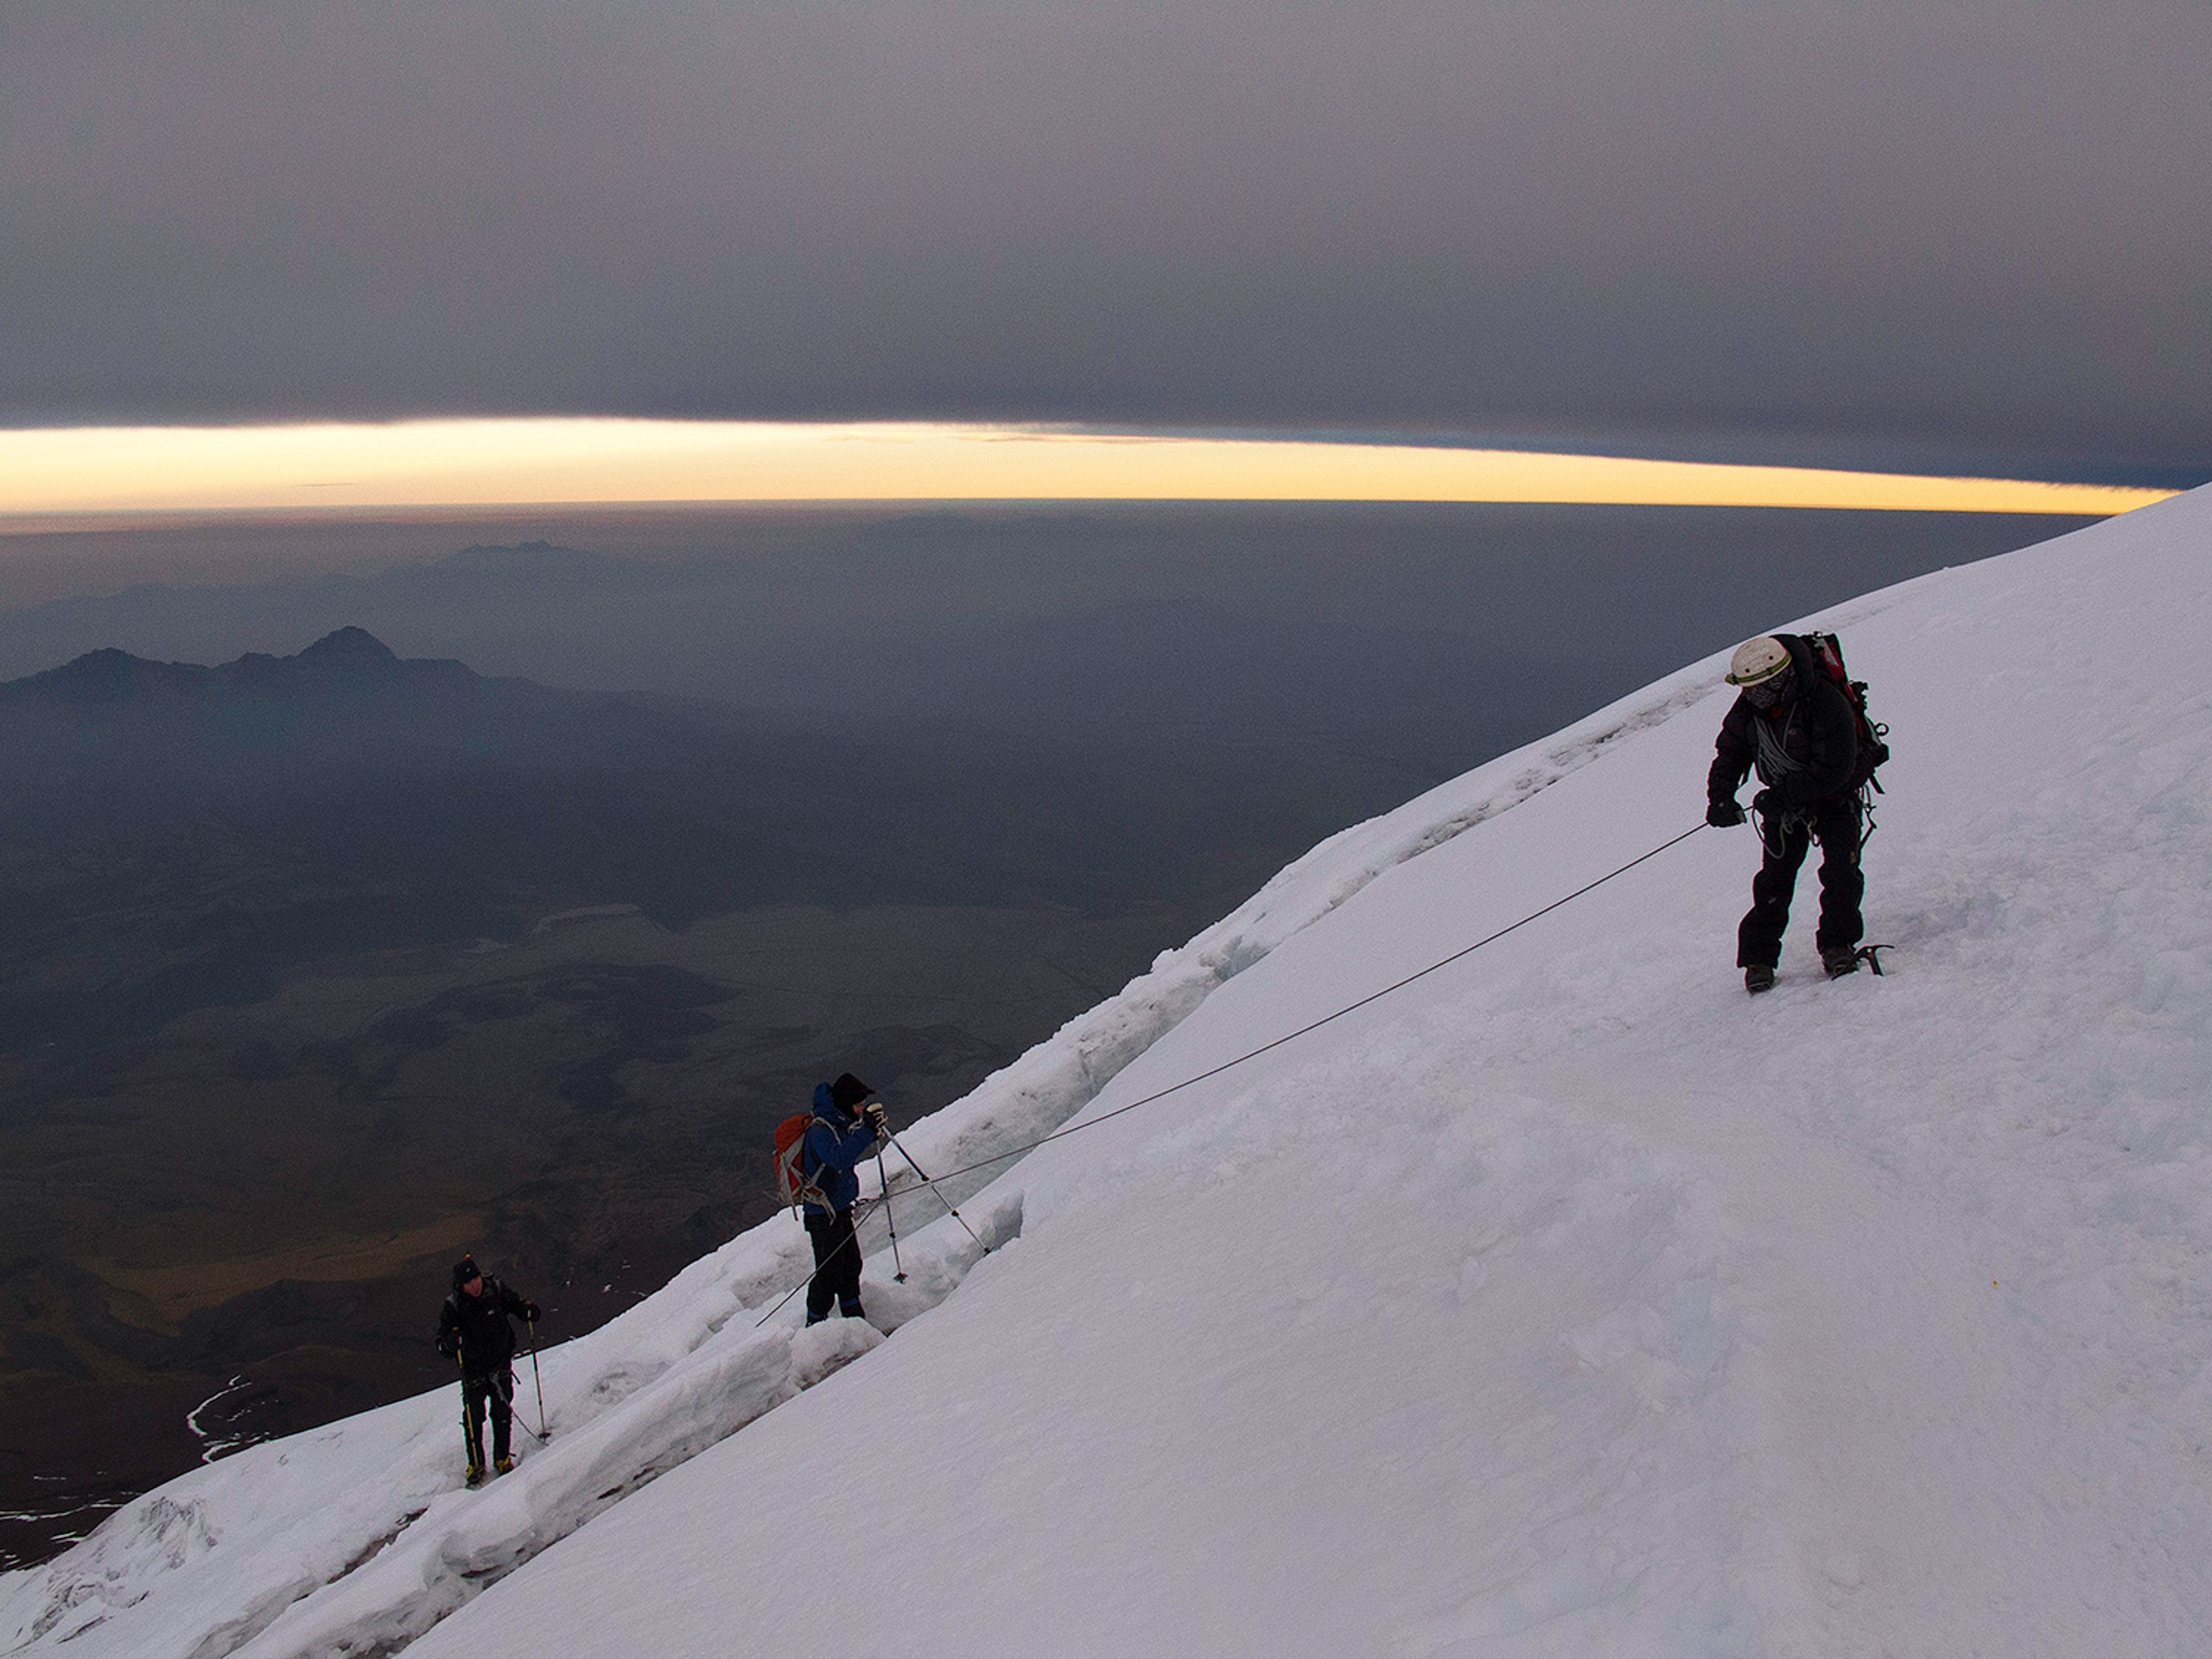 Group of climbers ascending one of the peaks in Ecuador